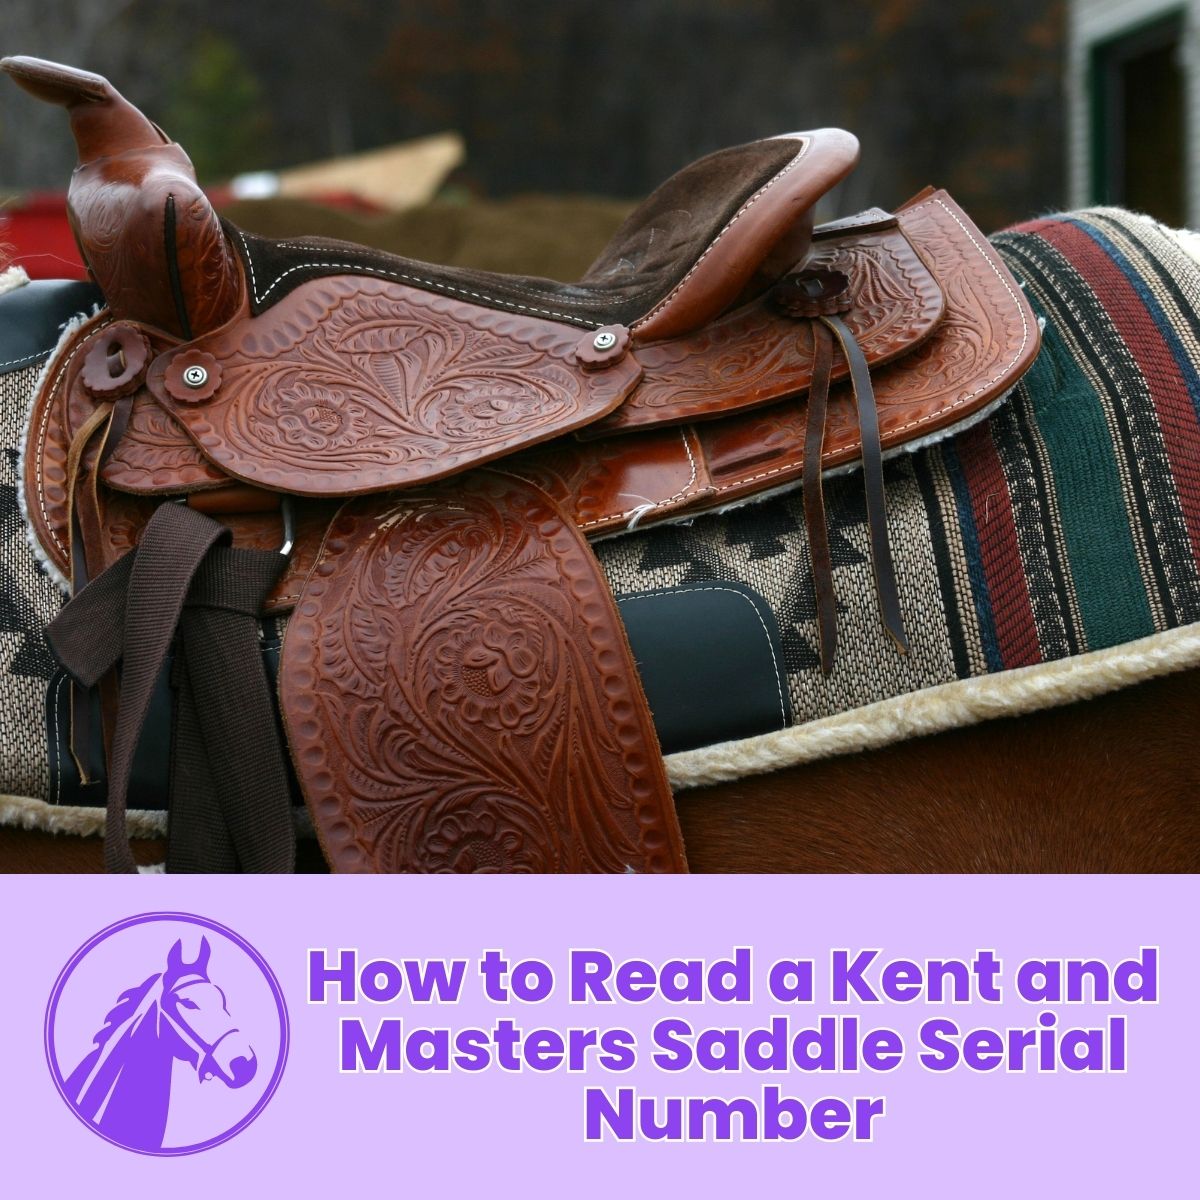 You are currently viewing How to Read a Kent and Masters Saddle Serial Number